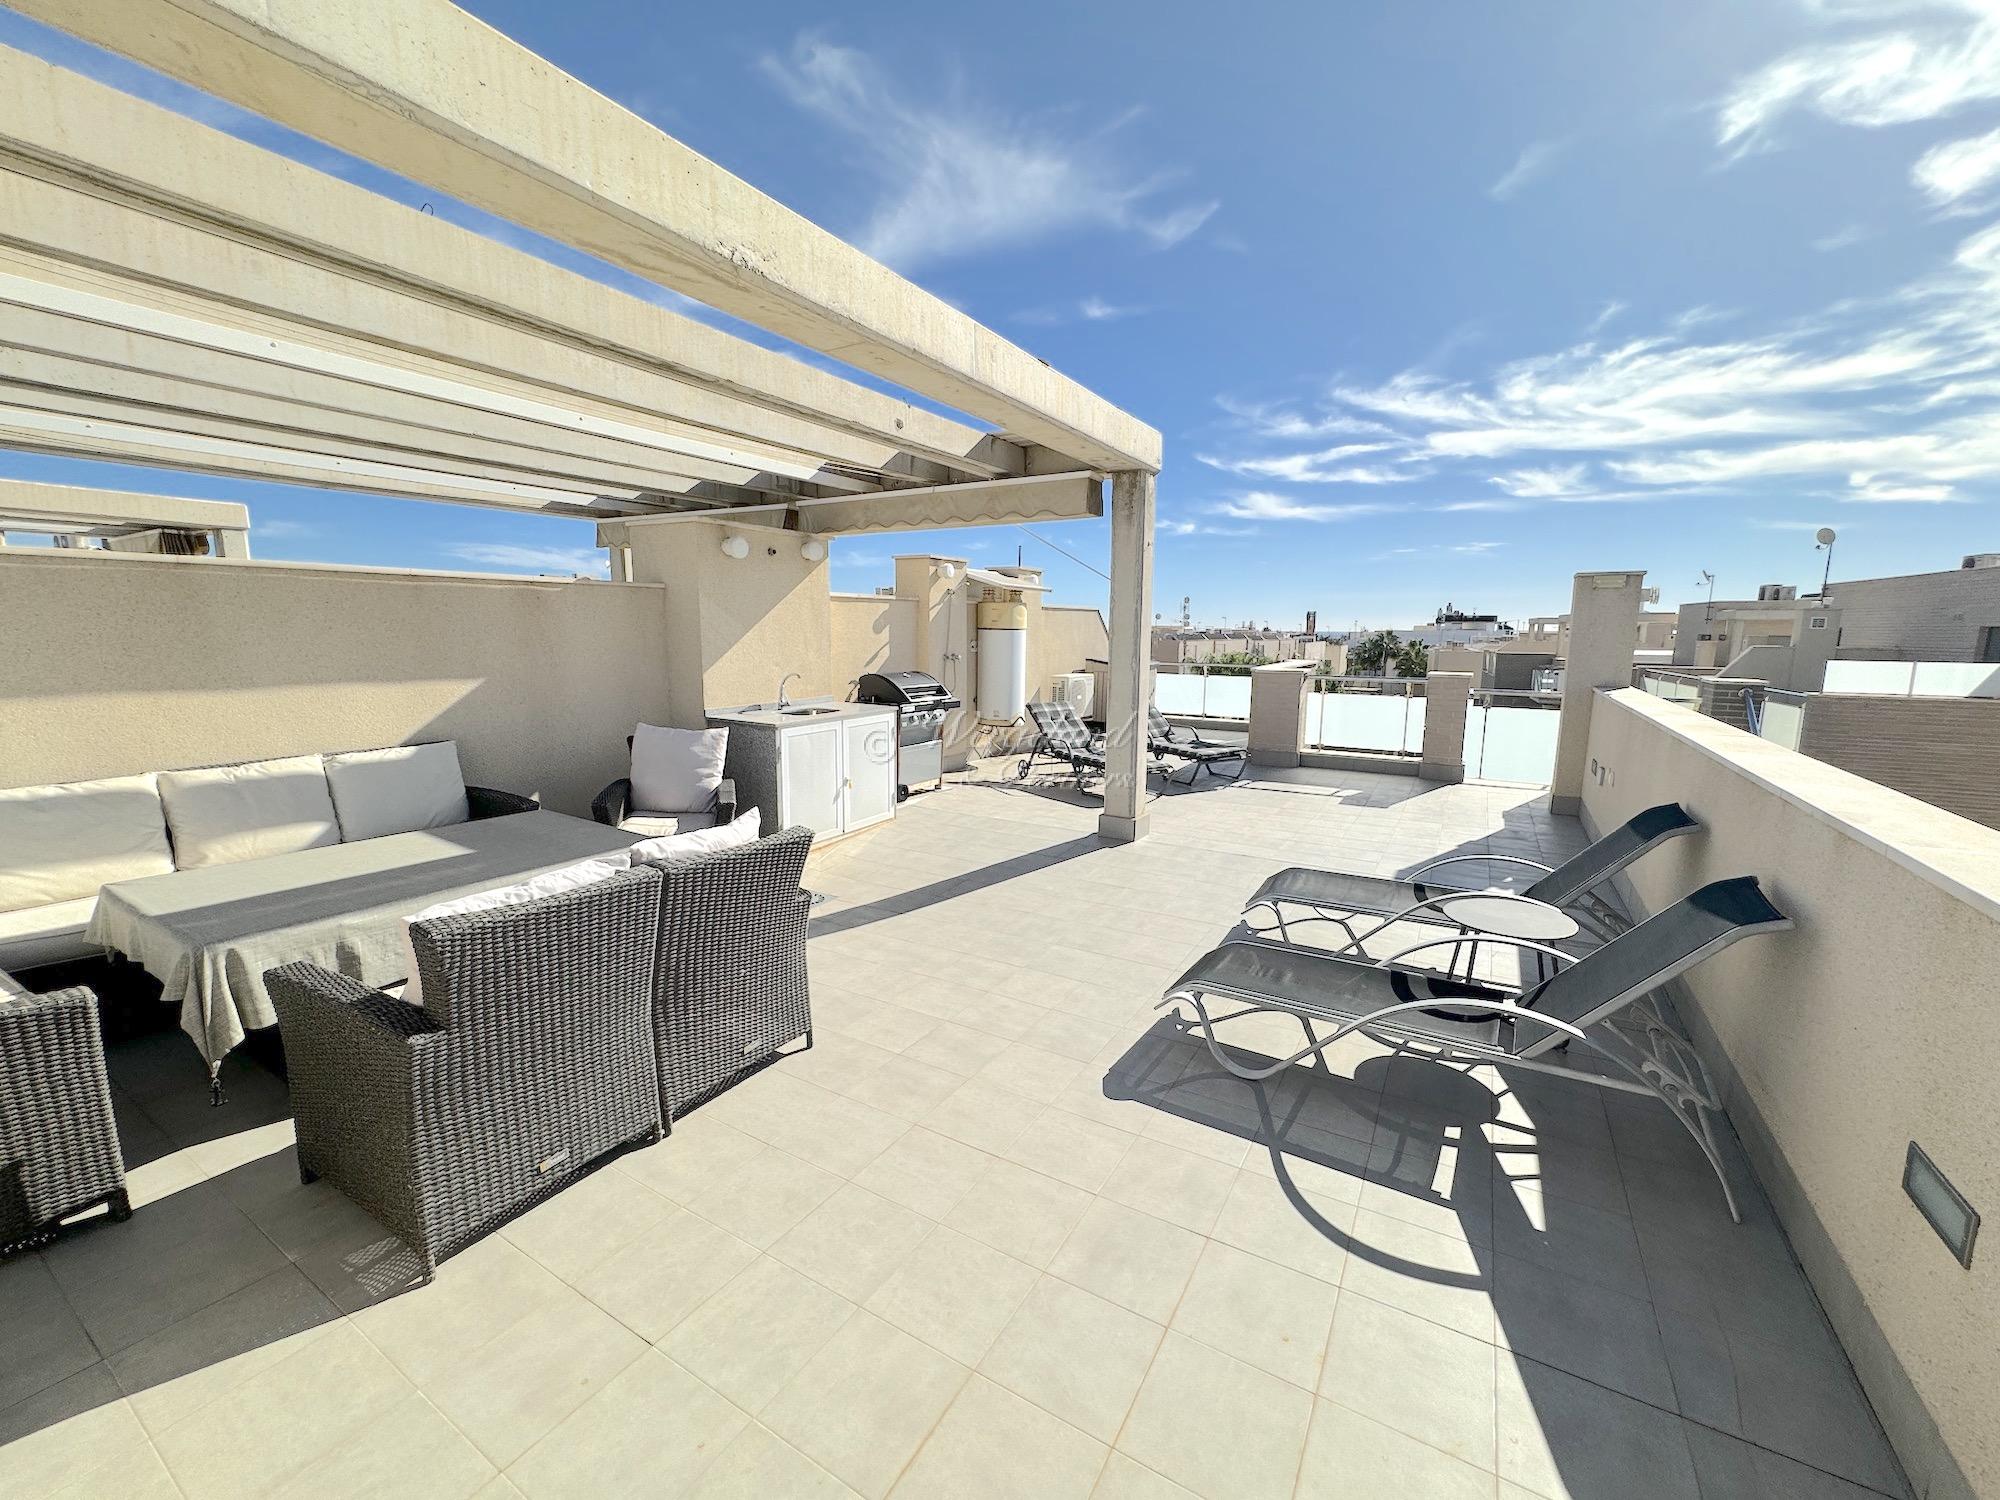 Close to the beach, 66 m2 roof terrace, 2 bedrooms / 2 bathrooms, garage space, storage [CCH10-5]